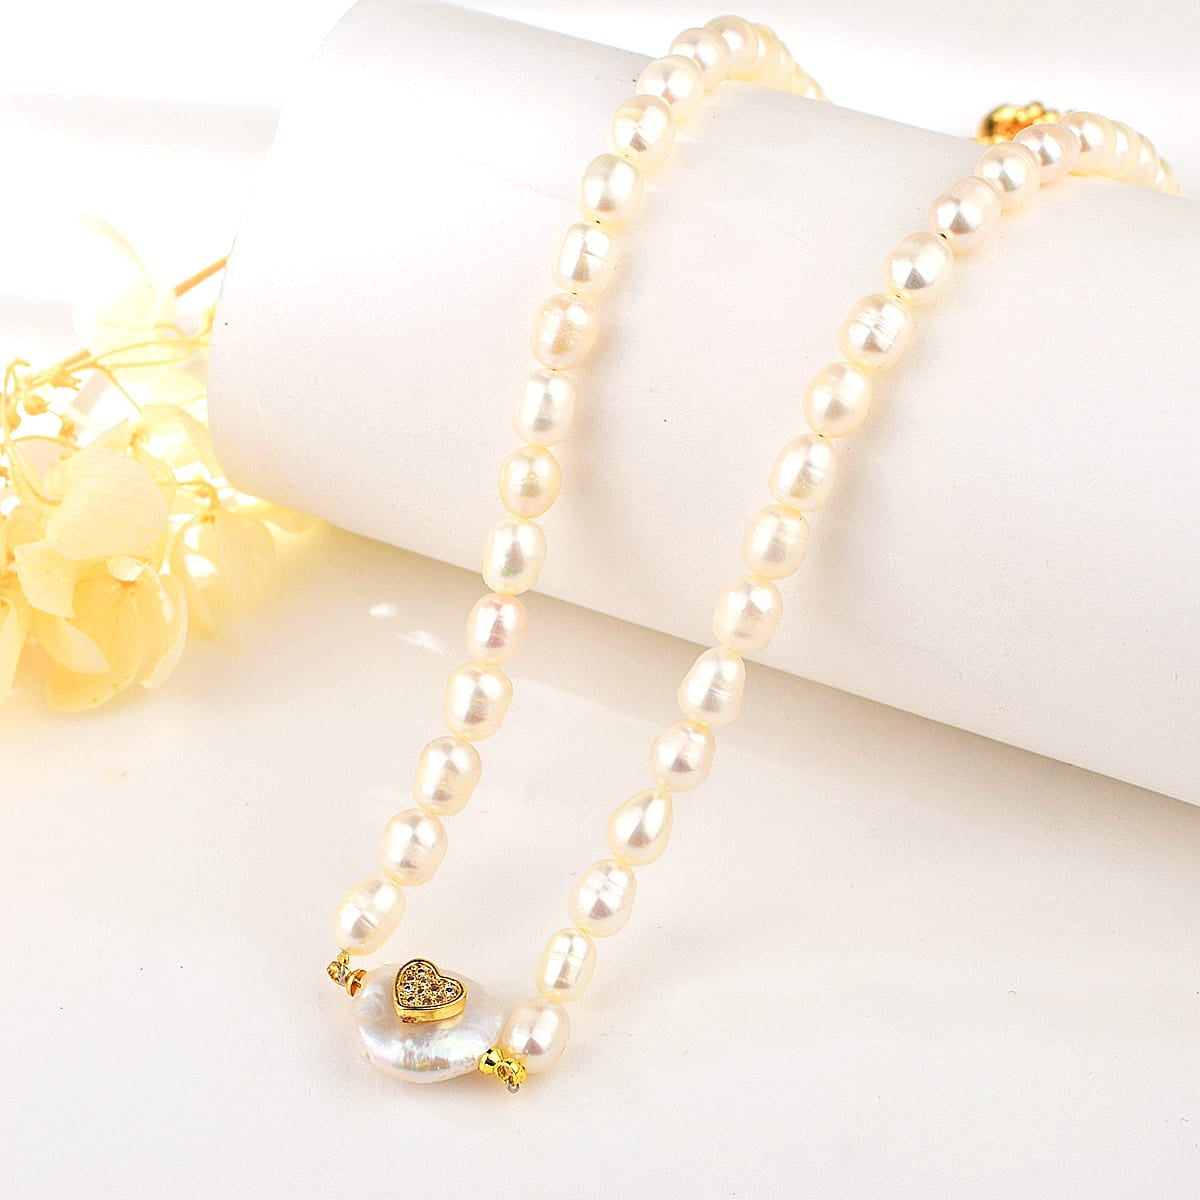 FRESH WATER PEARL WHITE PENDANT NECKLACE